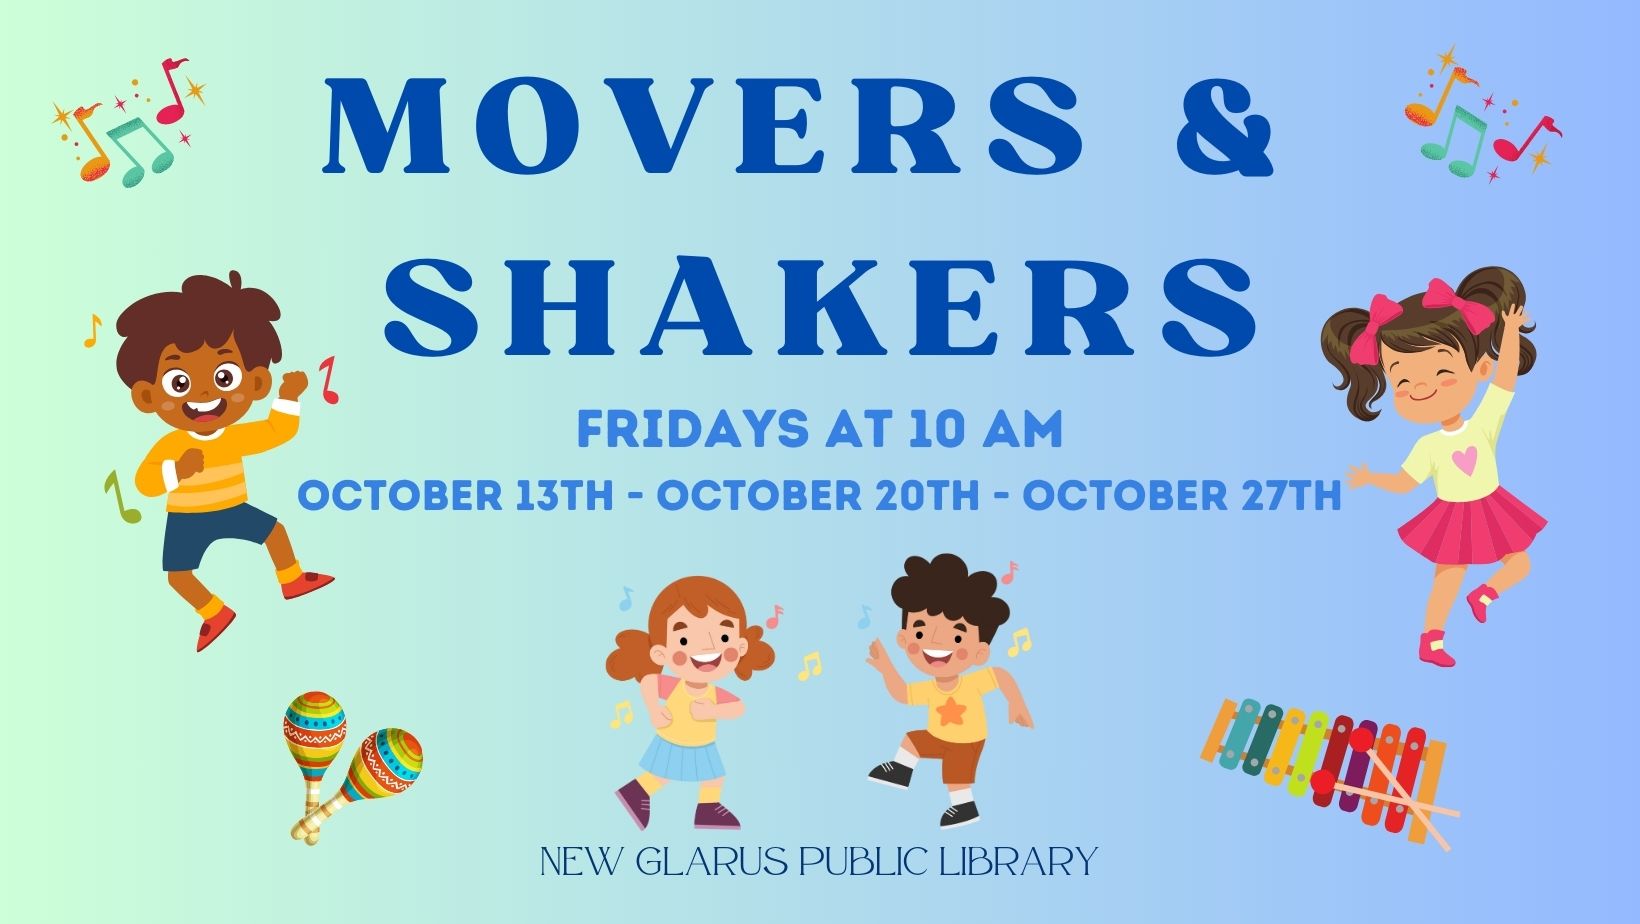 October Movers & Shakers dates